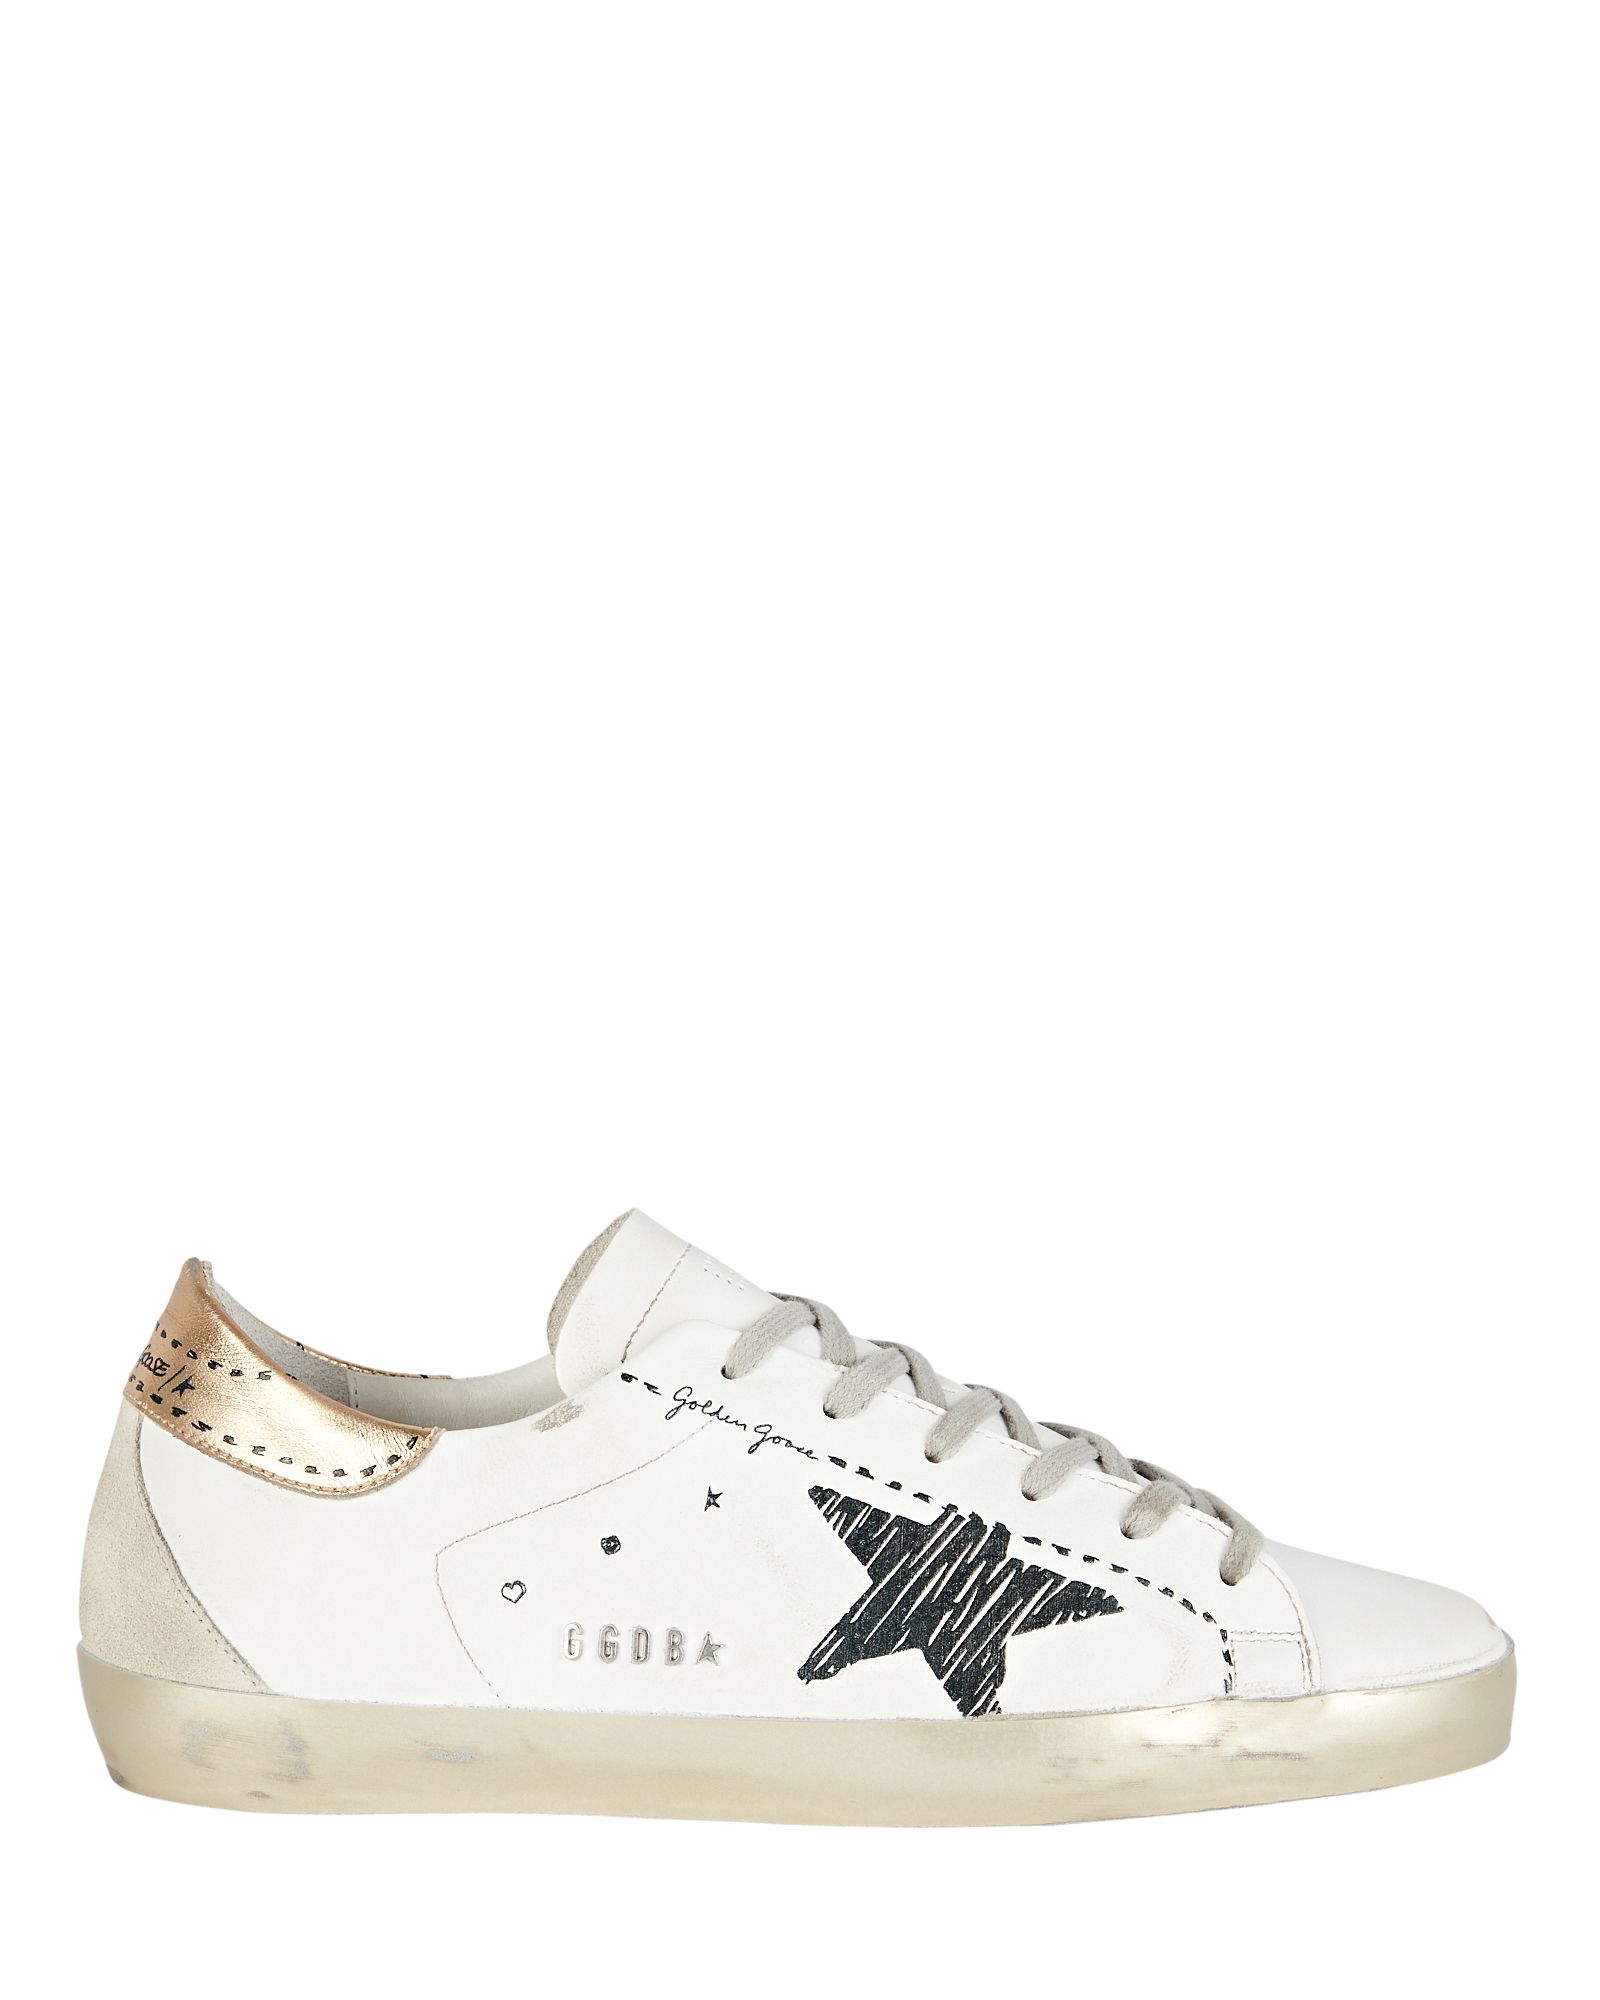 Golden Goose Superstar Leather Low-Top Sneakers, White 40 | INTERMIX